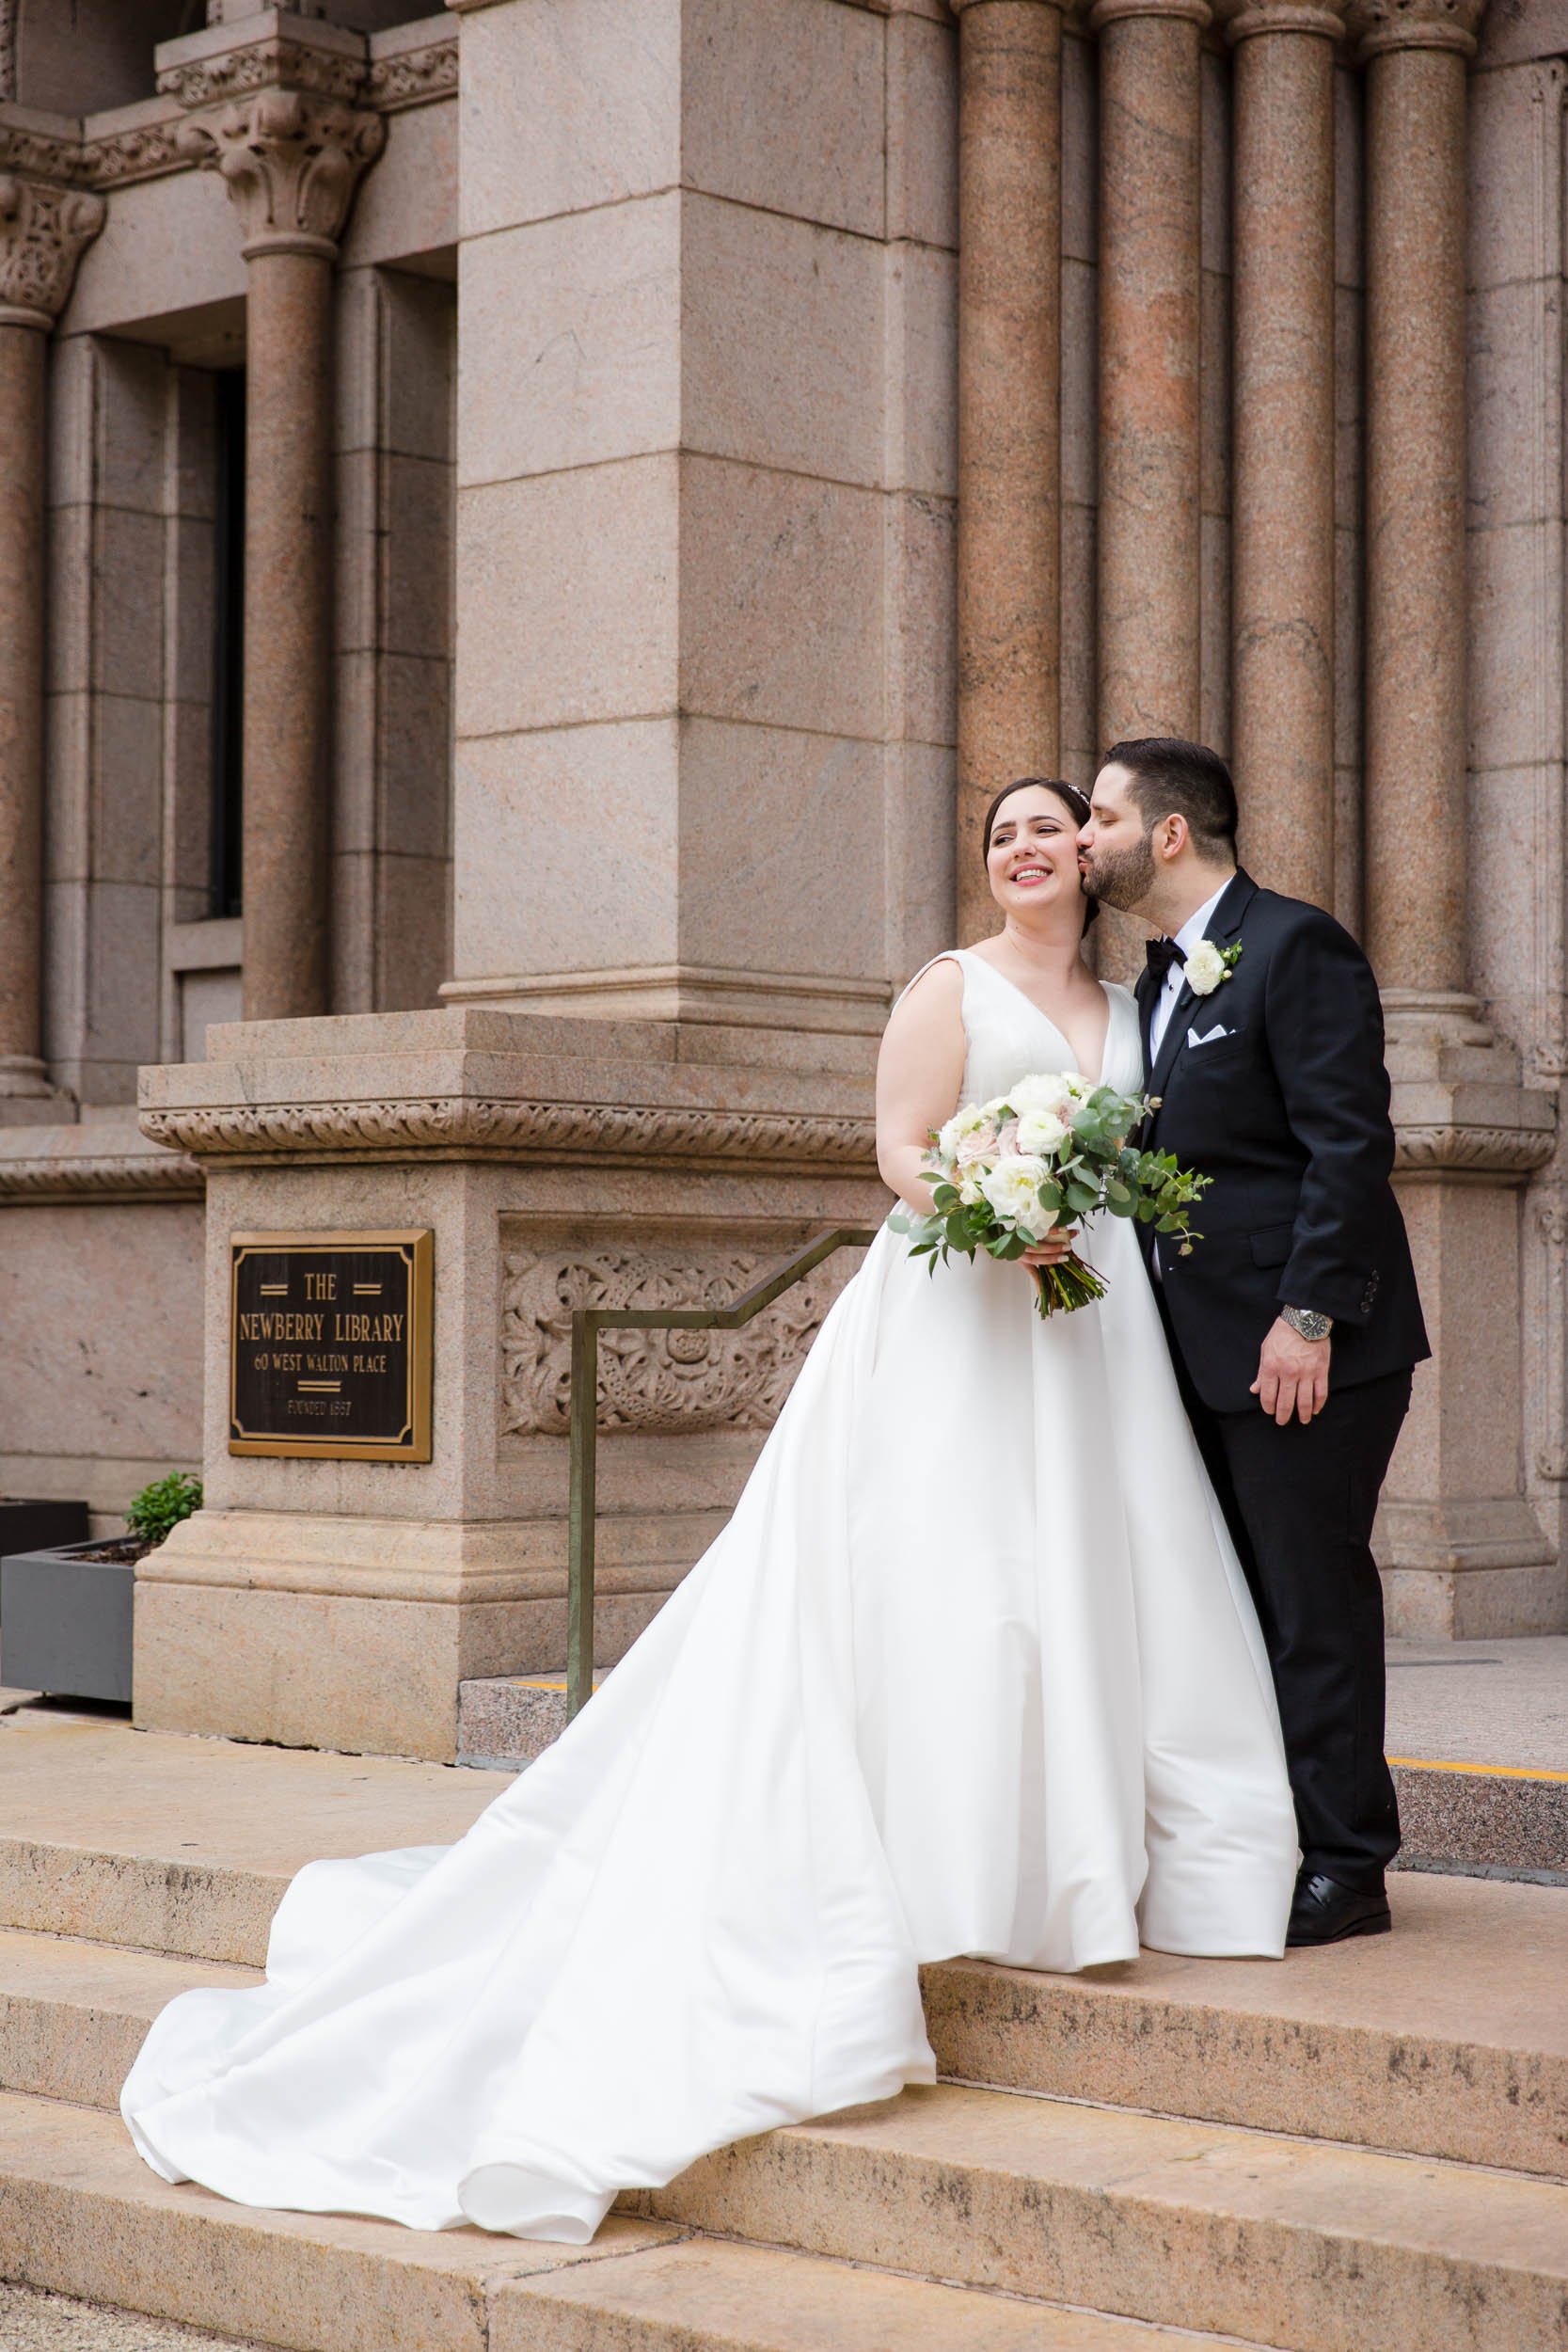 Wedding Day Photos | Newberry Library | J. Brown Photography | classic portrait of bride and groom.